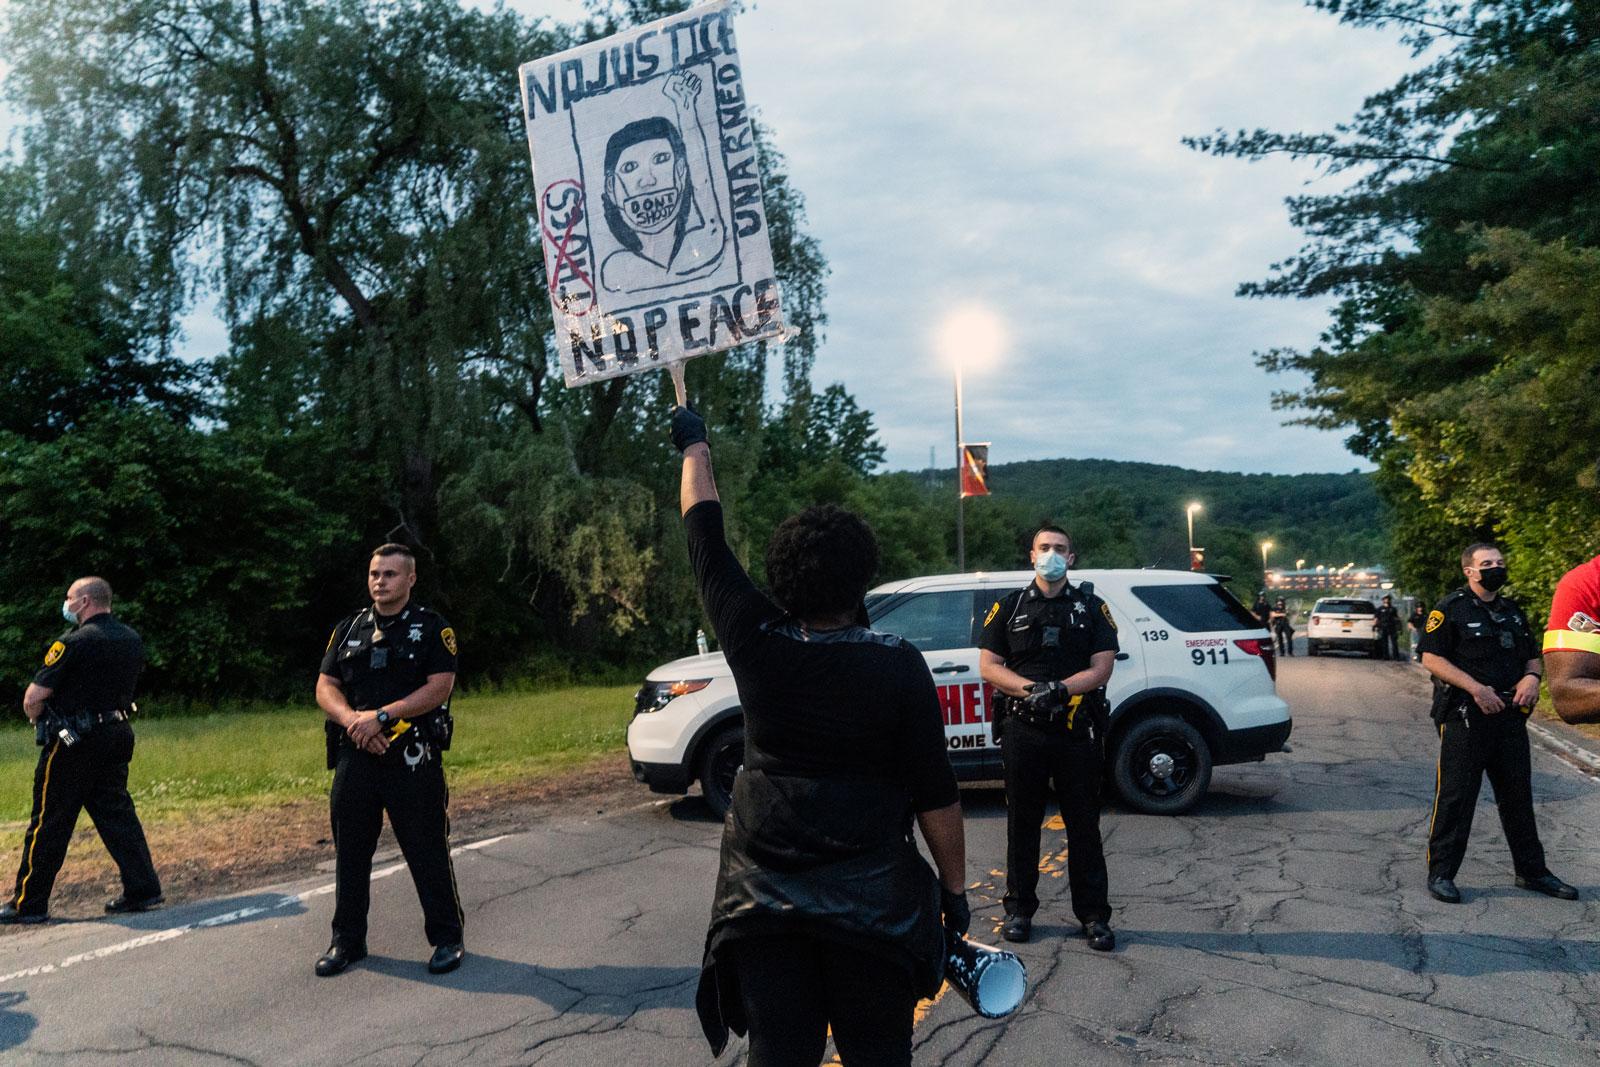 A protest outside Broome County Jail, Binghamton, New York